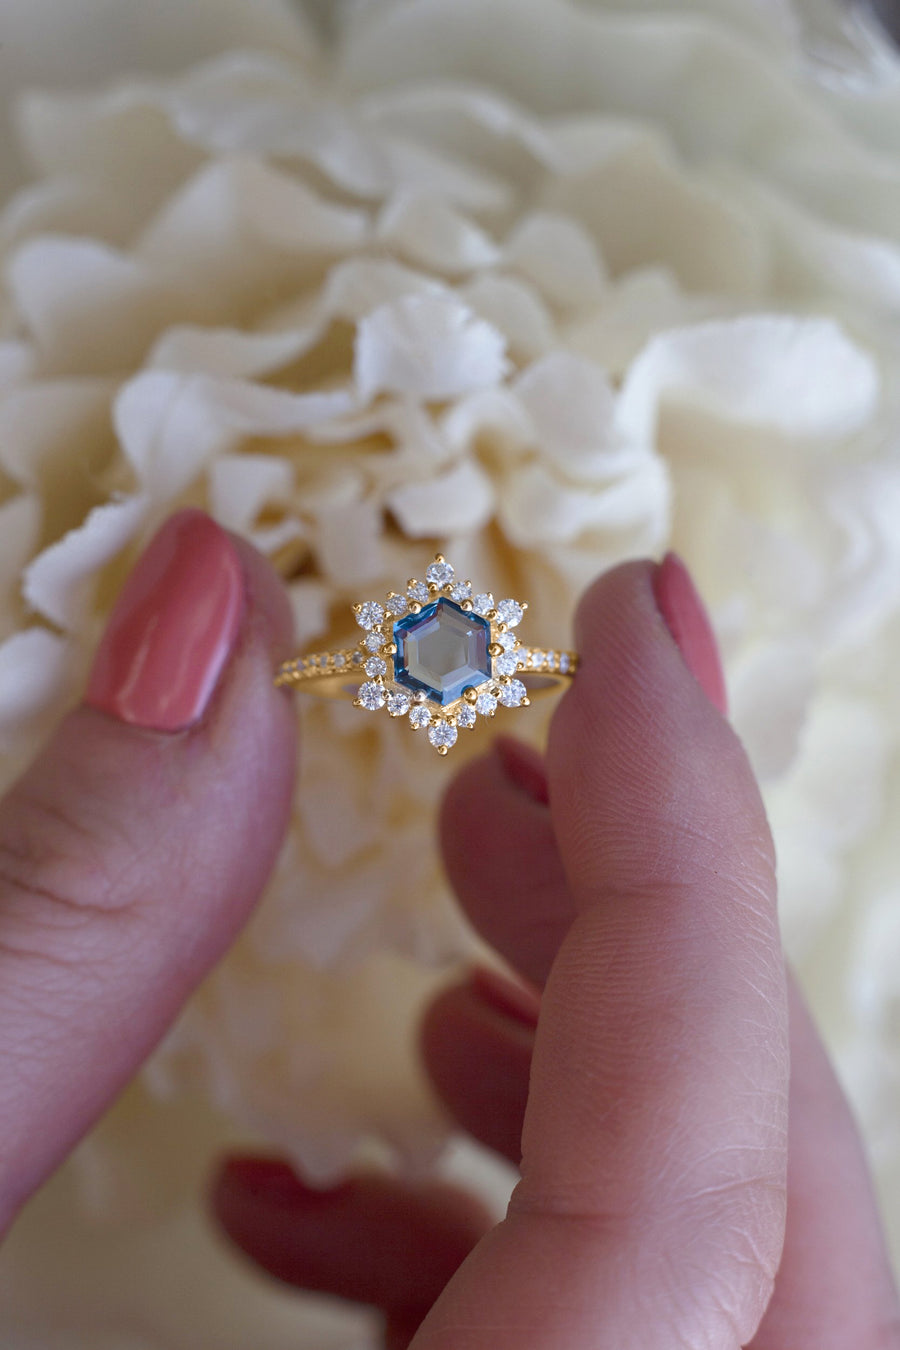 Cleo London Blue Topaz Ring with Moissanites